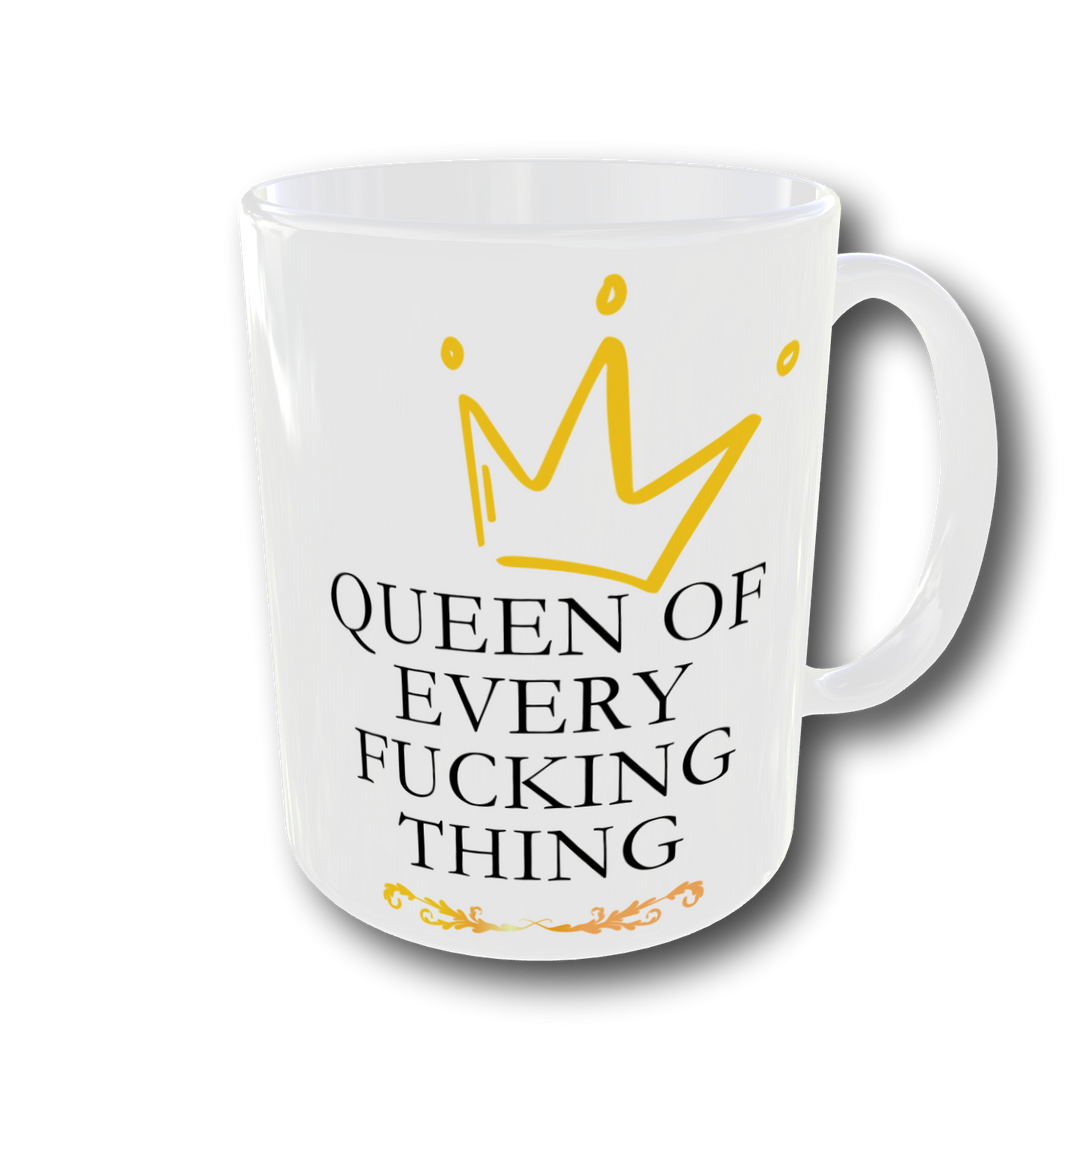 Birthday delivery in Melbourne needs the perfect mug for every queen of fucking everything!